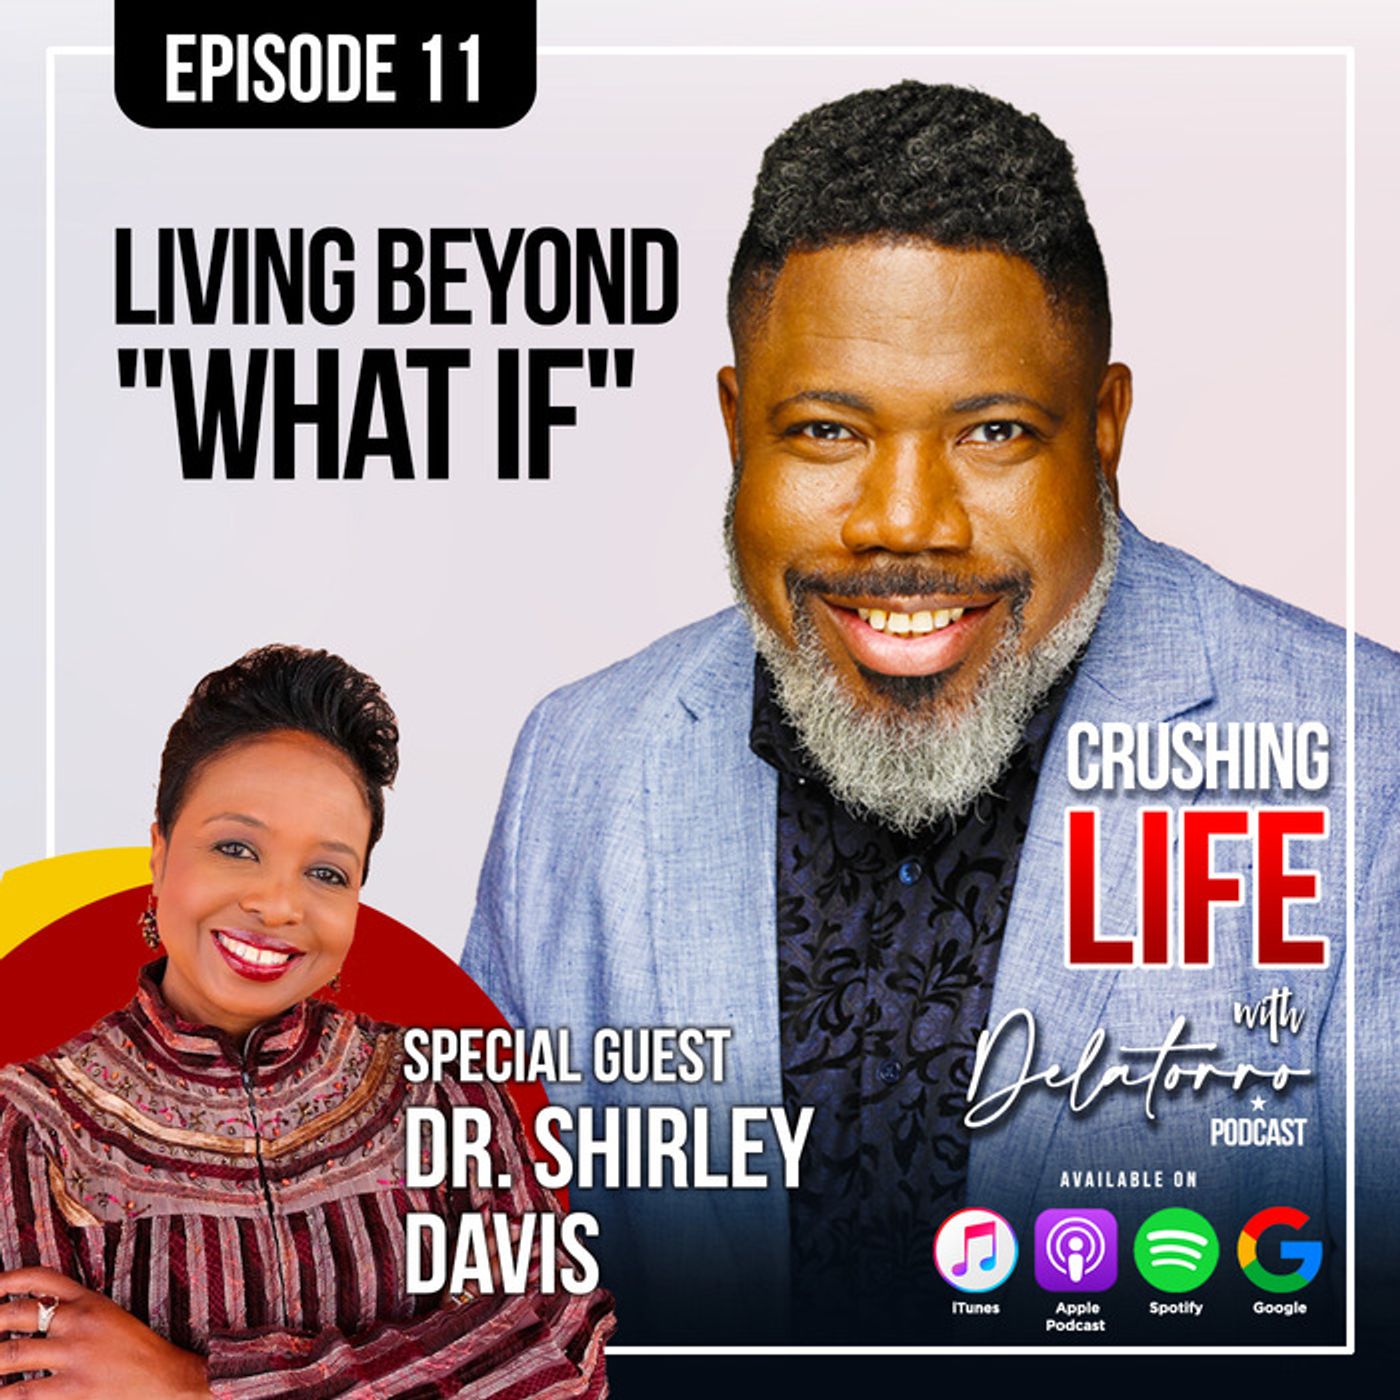 Crushing Life with Delatorro Podcast Episode #11 - Living Beyond “What If”